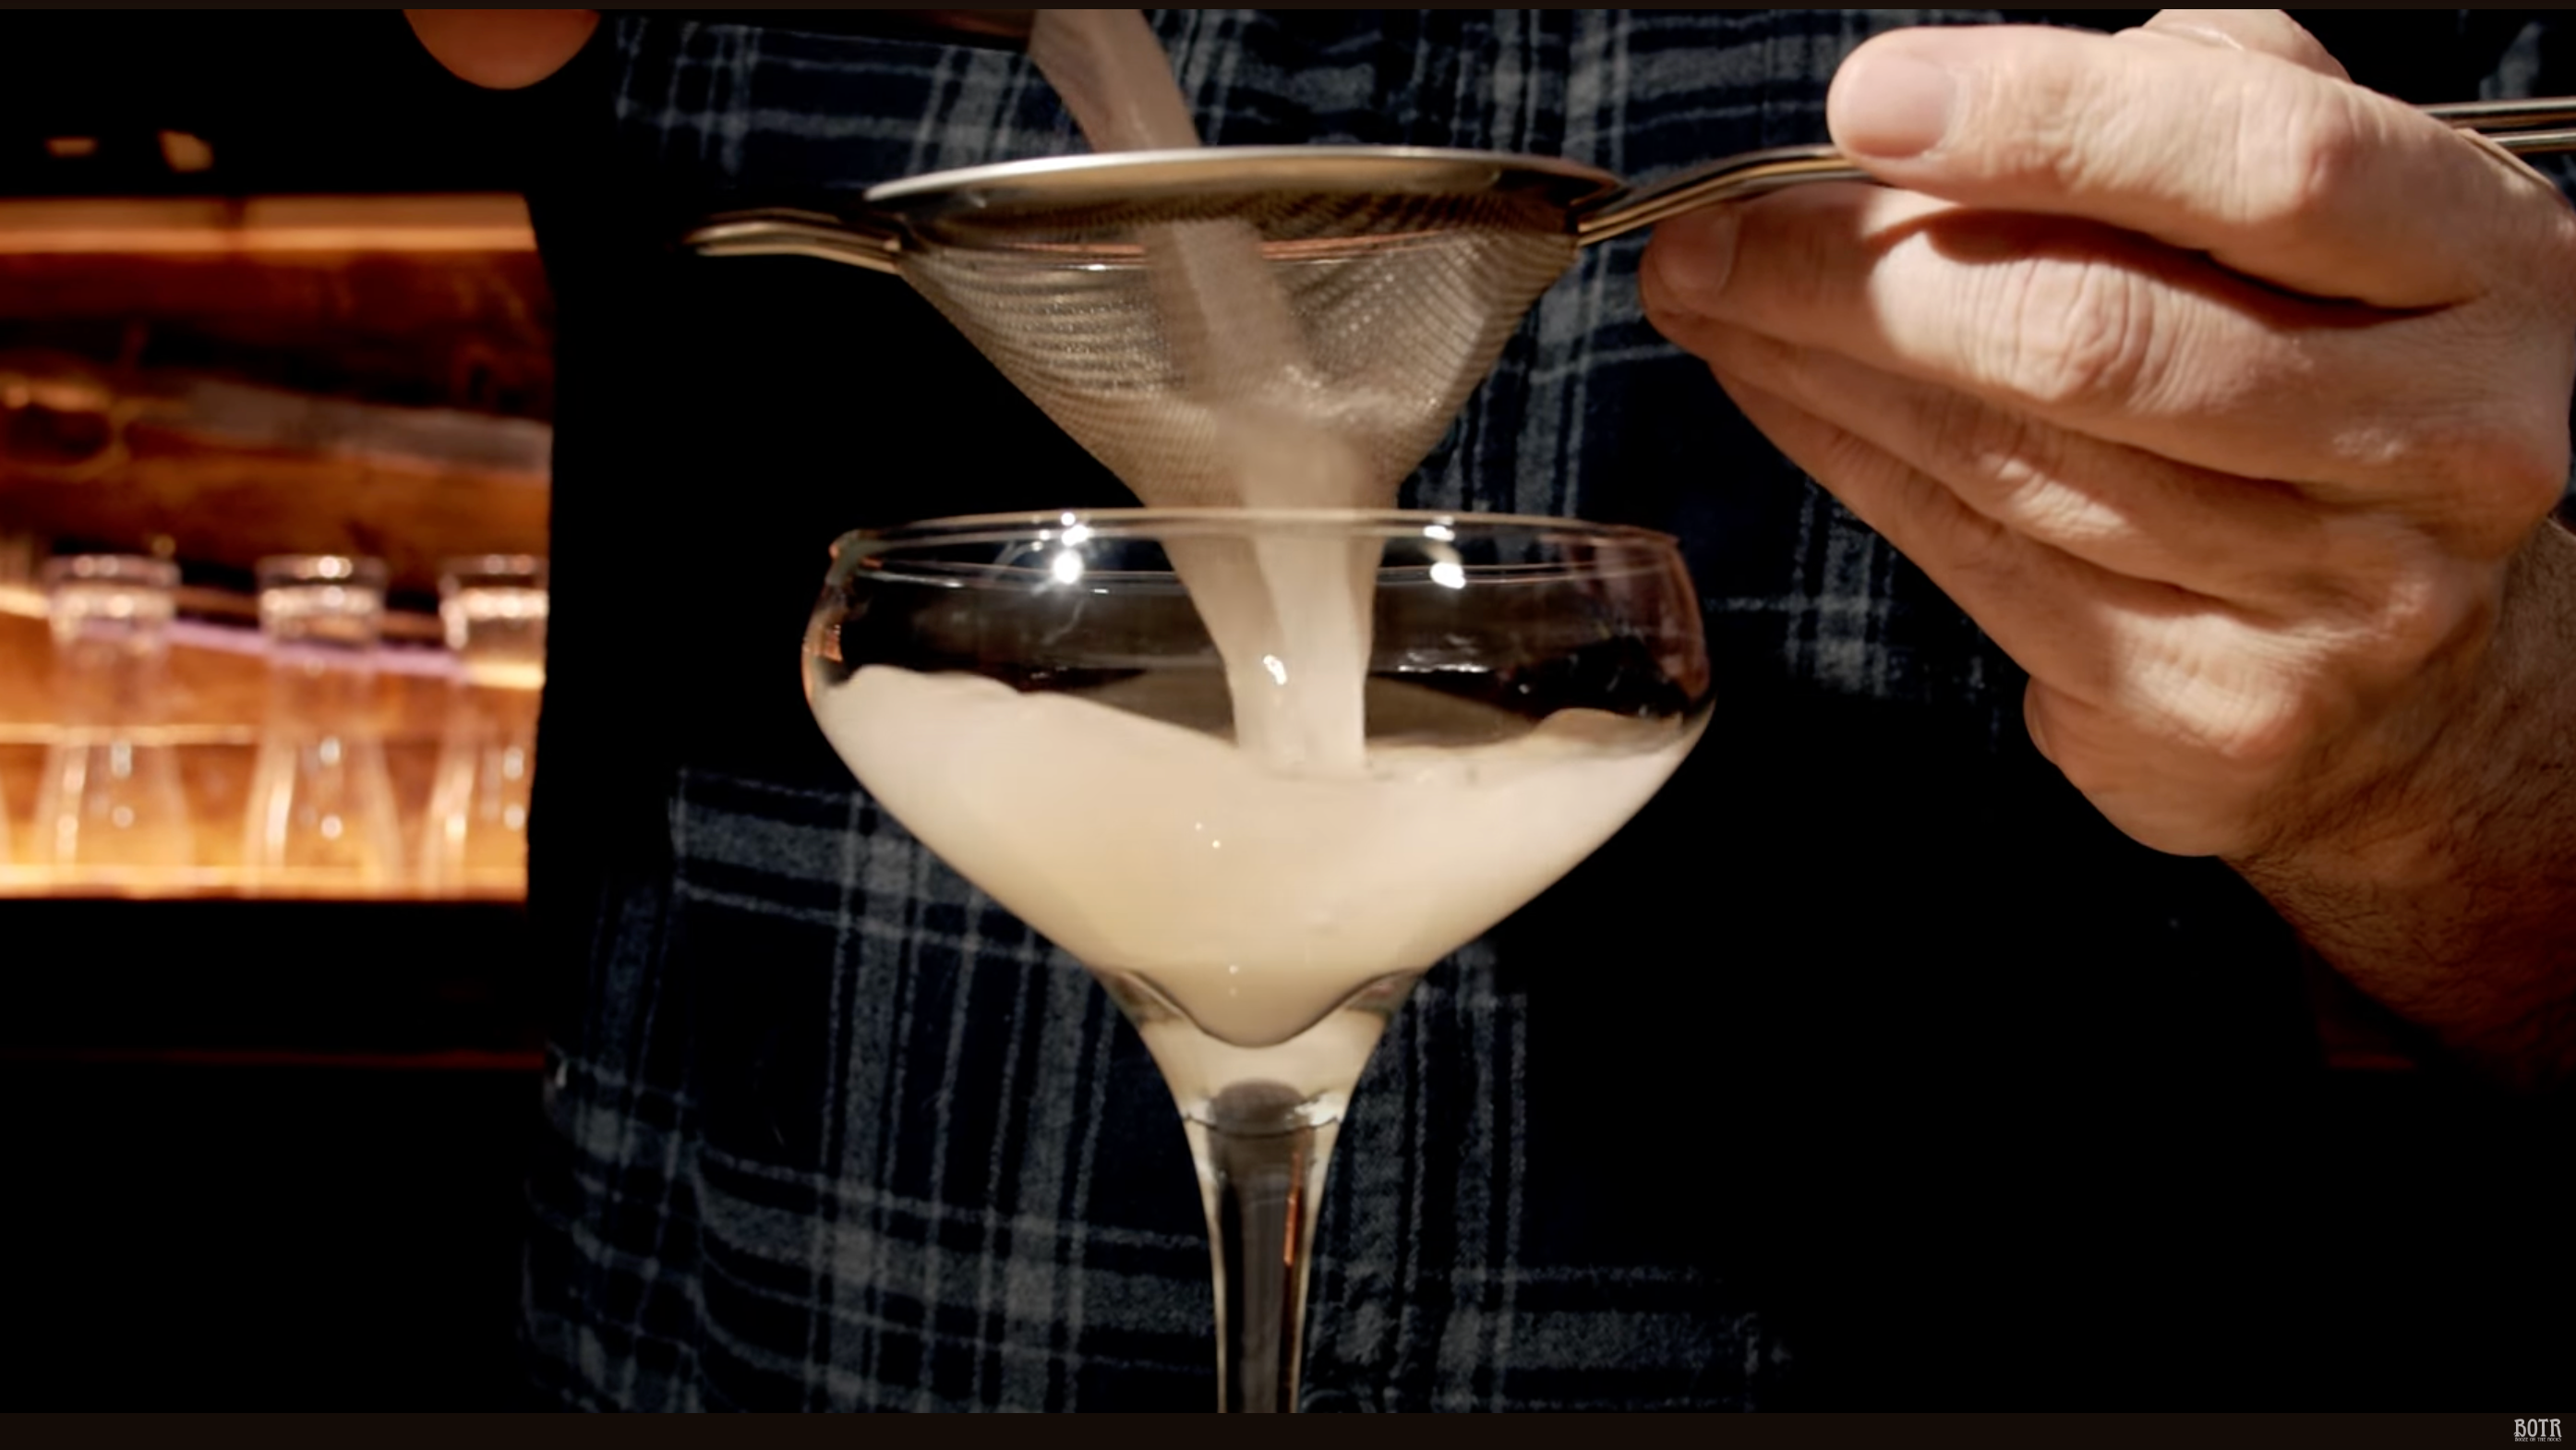 French Blonde cocktail being poured into a coupe glass